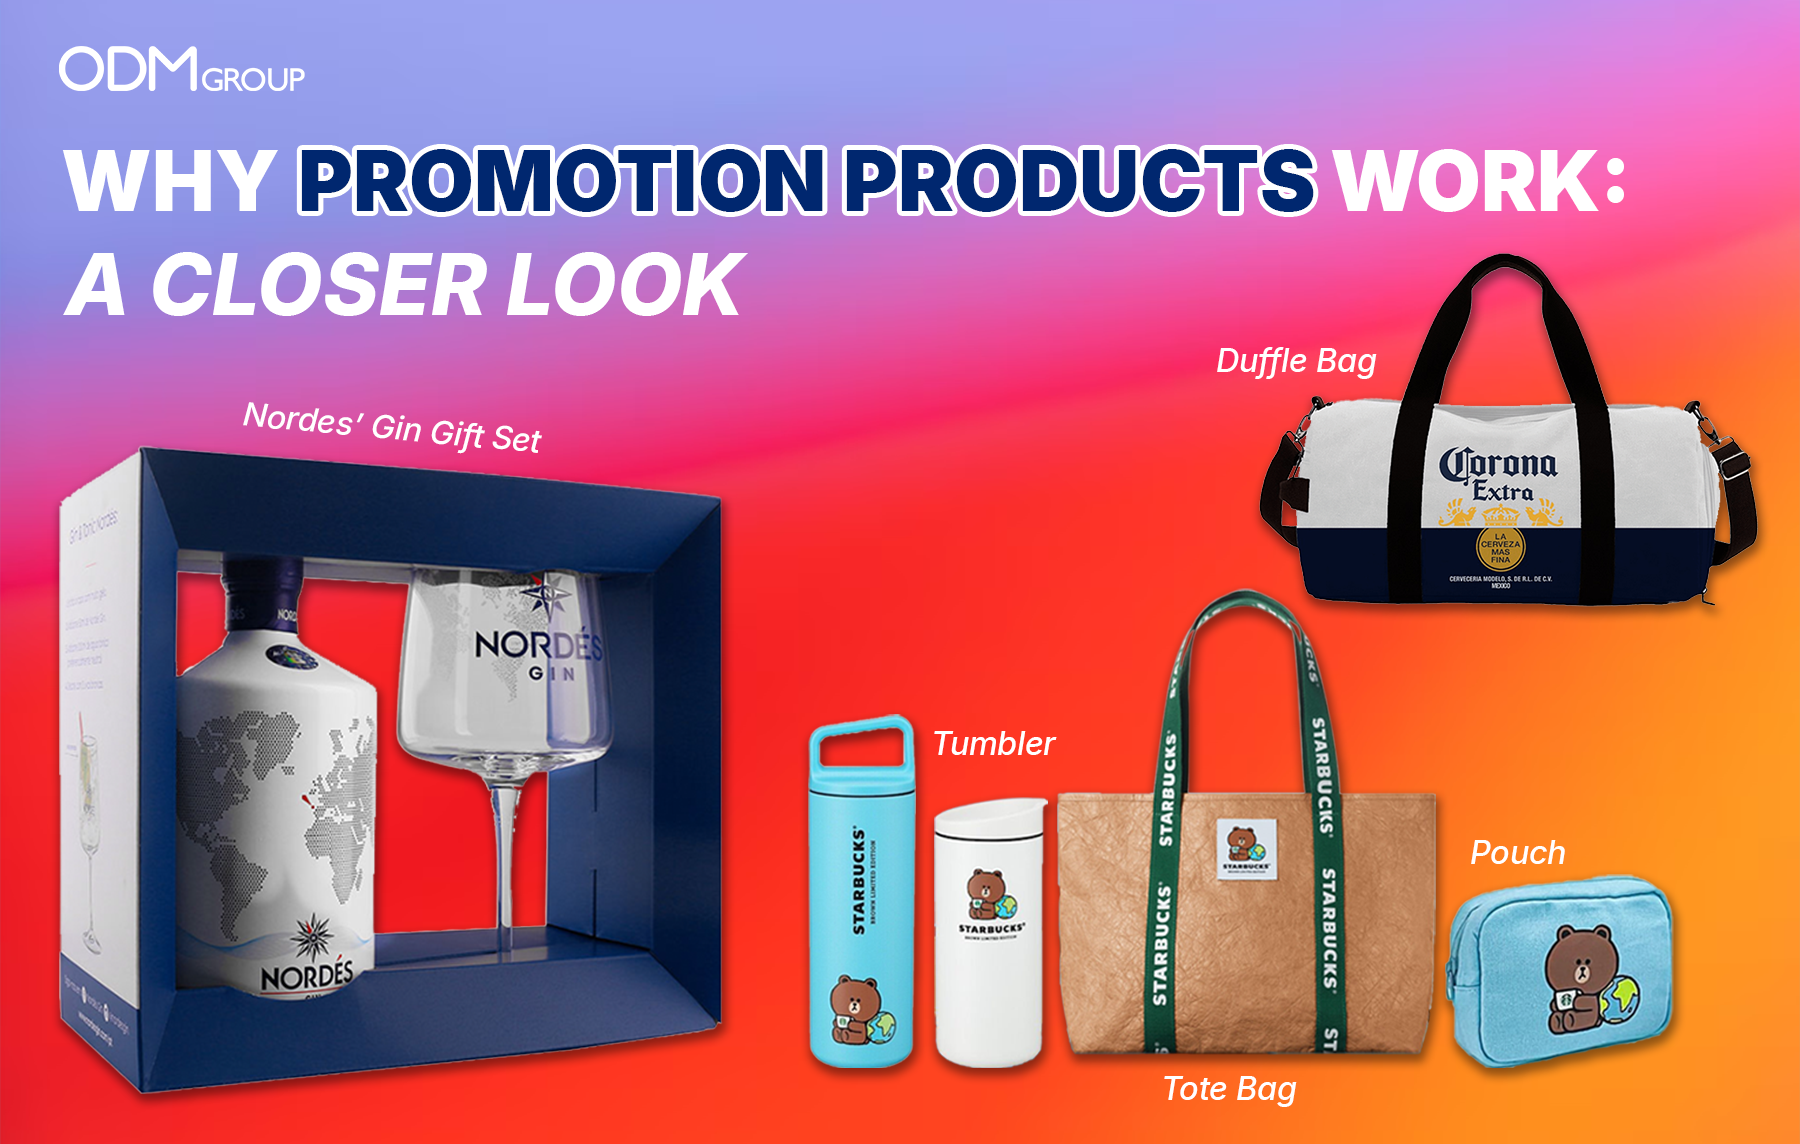 Various promotional products from ODM Group including Nordes' Gin Gift Set, Corona Extra Duffel Bag, Starbucks Tumbler, Tote Bag, and Pouch